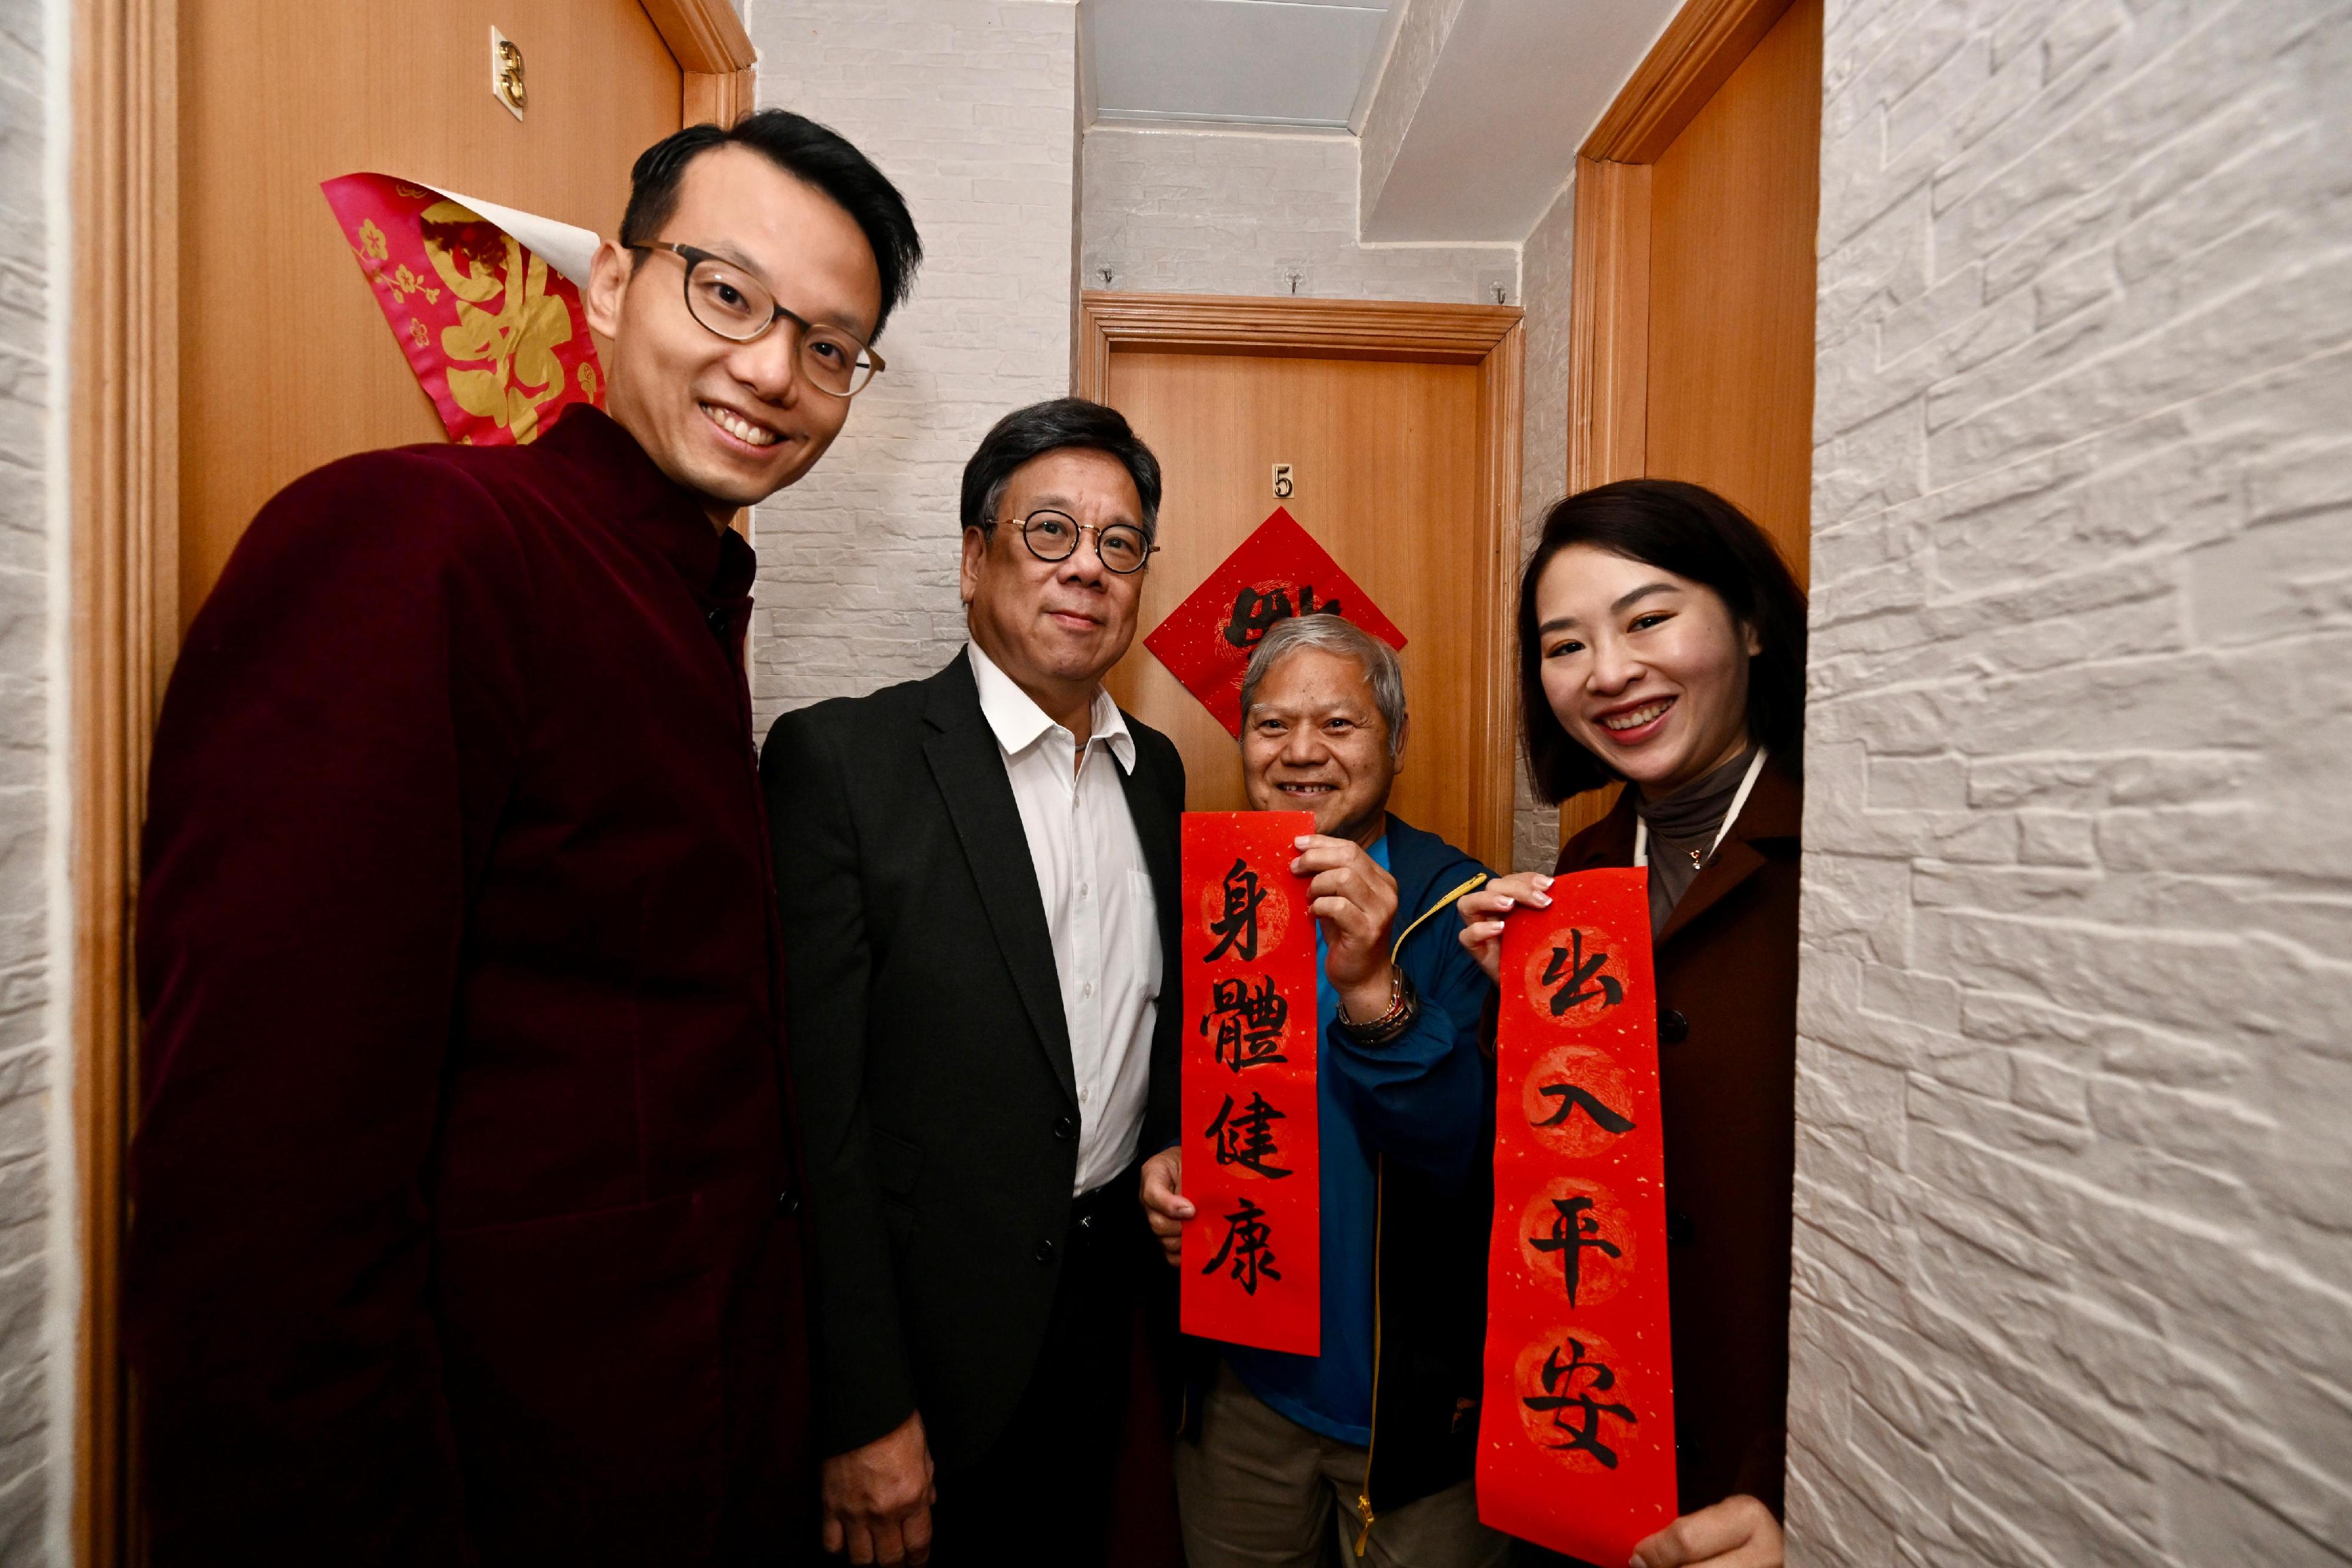 The Secretary for Commerce and Economic Development, Mr Algernon Yau (second left), accompanied by the District Officer (Kwai Tsing), Mr Huggin Tang (first left), and Kwai Tsing District Council member Ms Jody Kwok (first right) visit an elderly person living at Shek Lei, Kwai Chung, today (February 8).